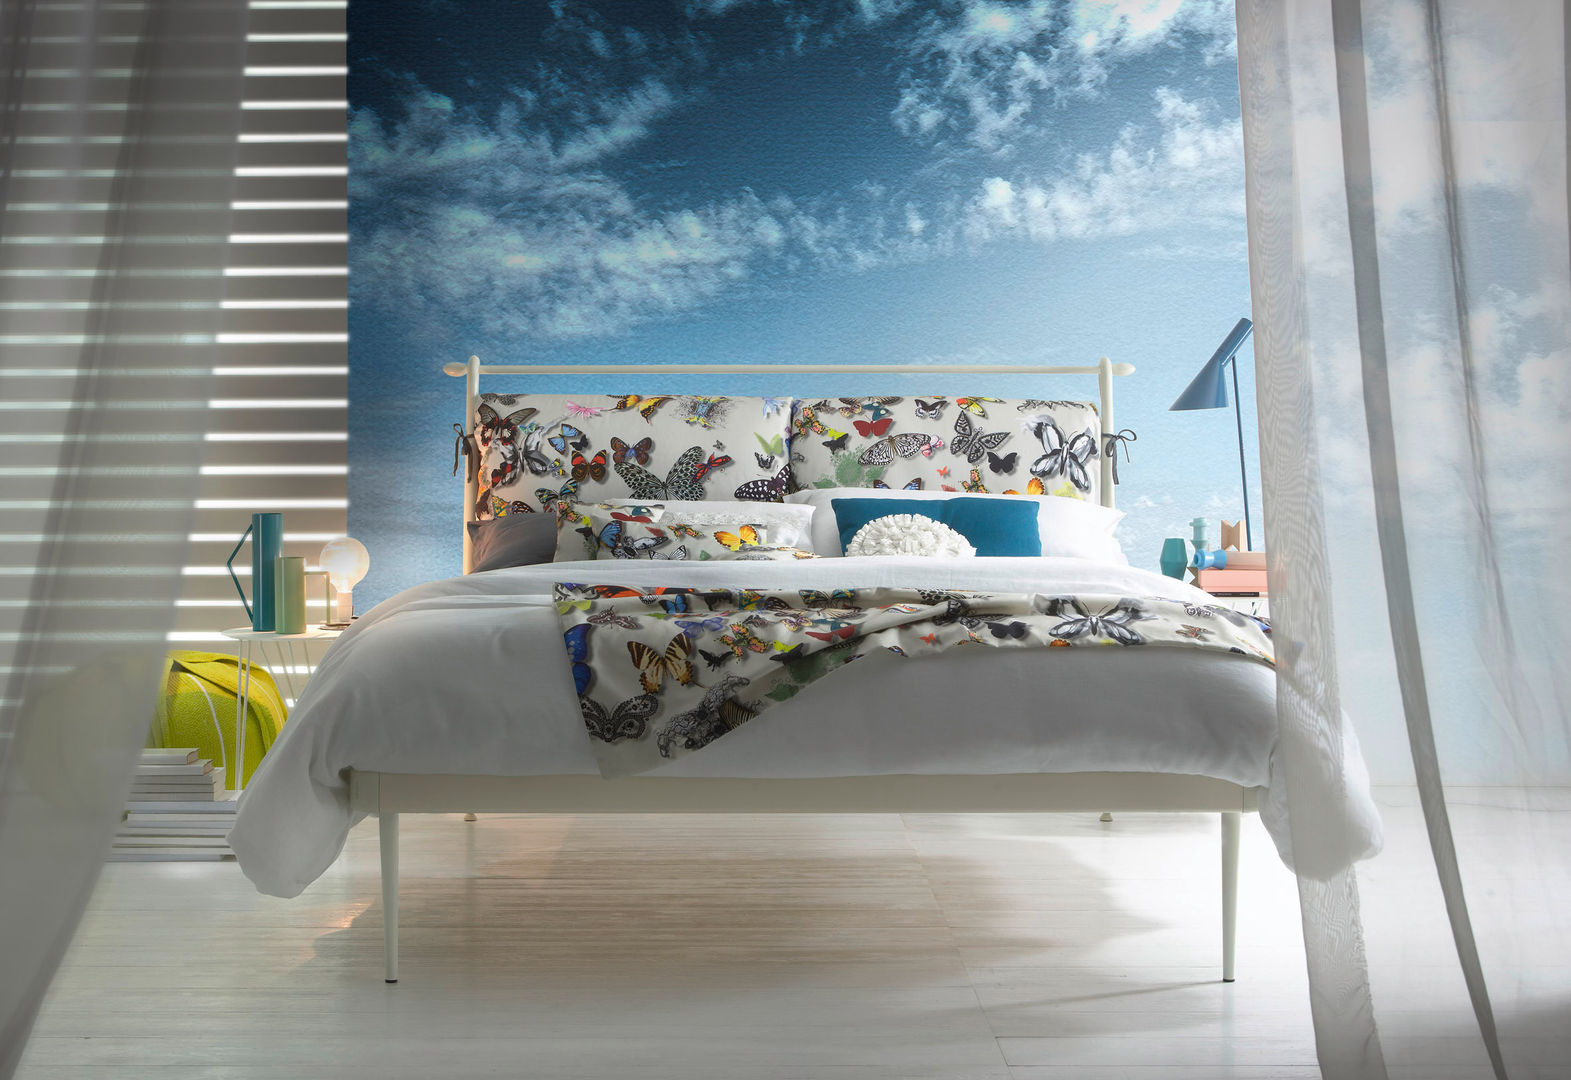 CIACCI CLASSIC, Ciacci Ciacci Eclectic style bedroom Beds & headboards